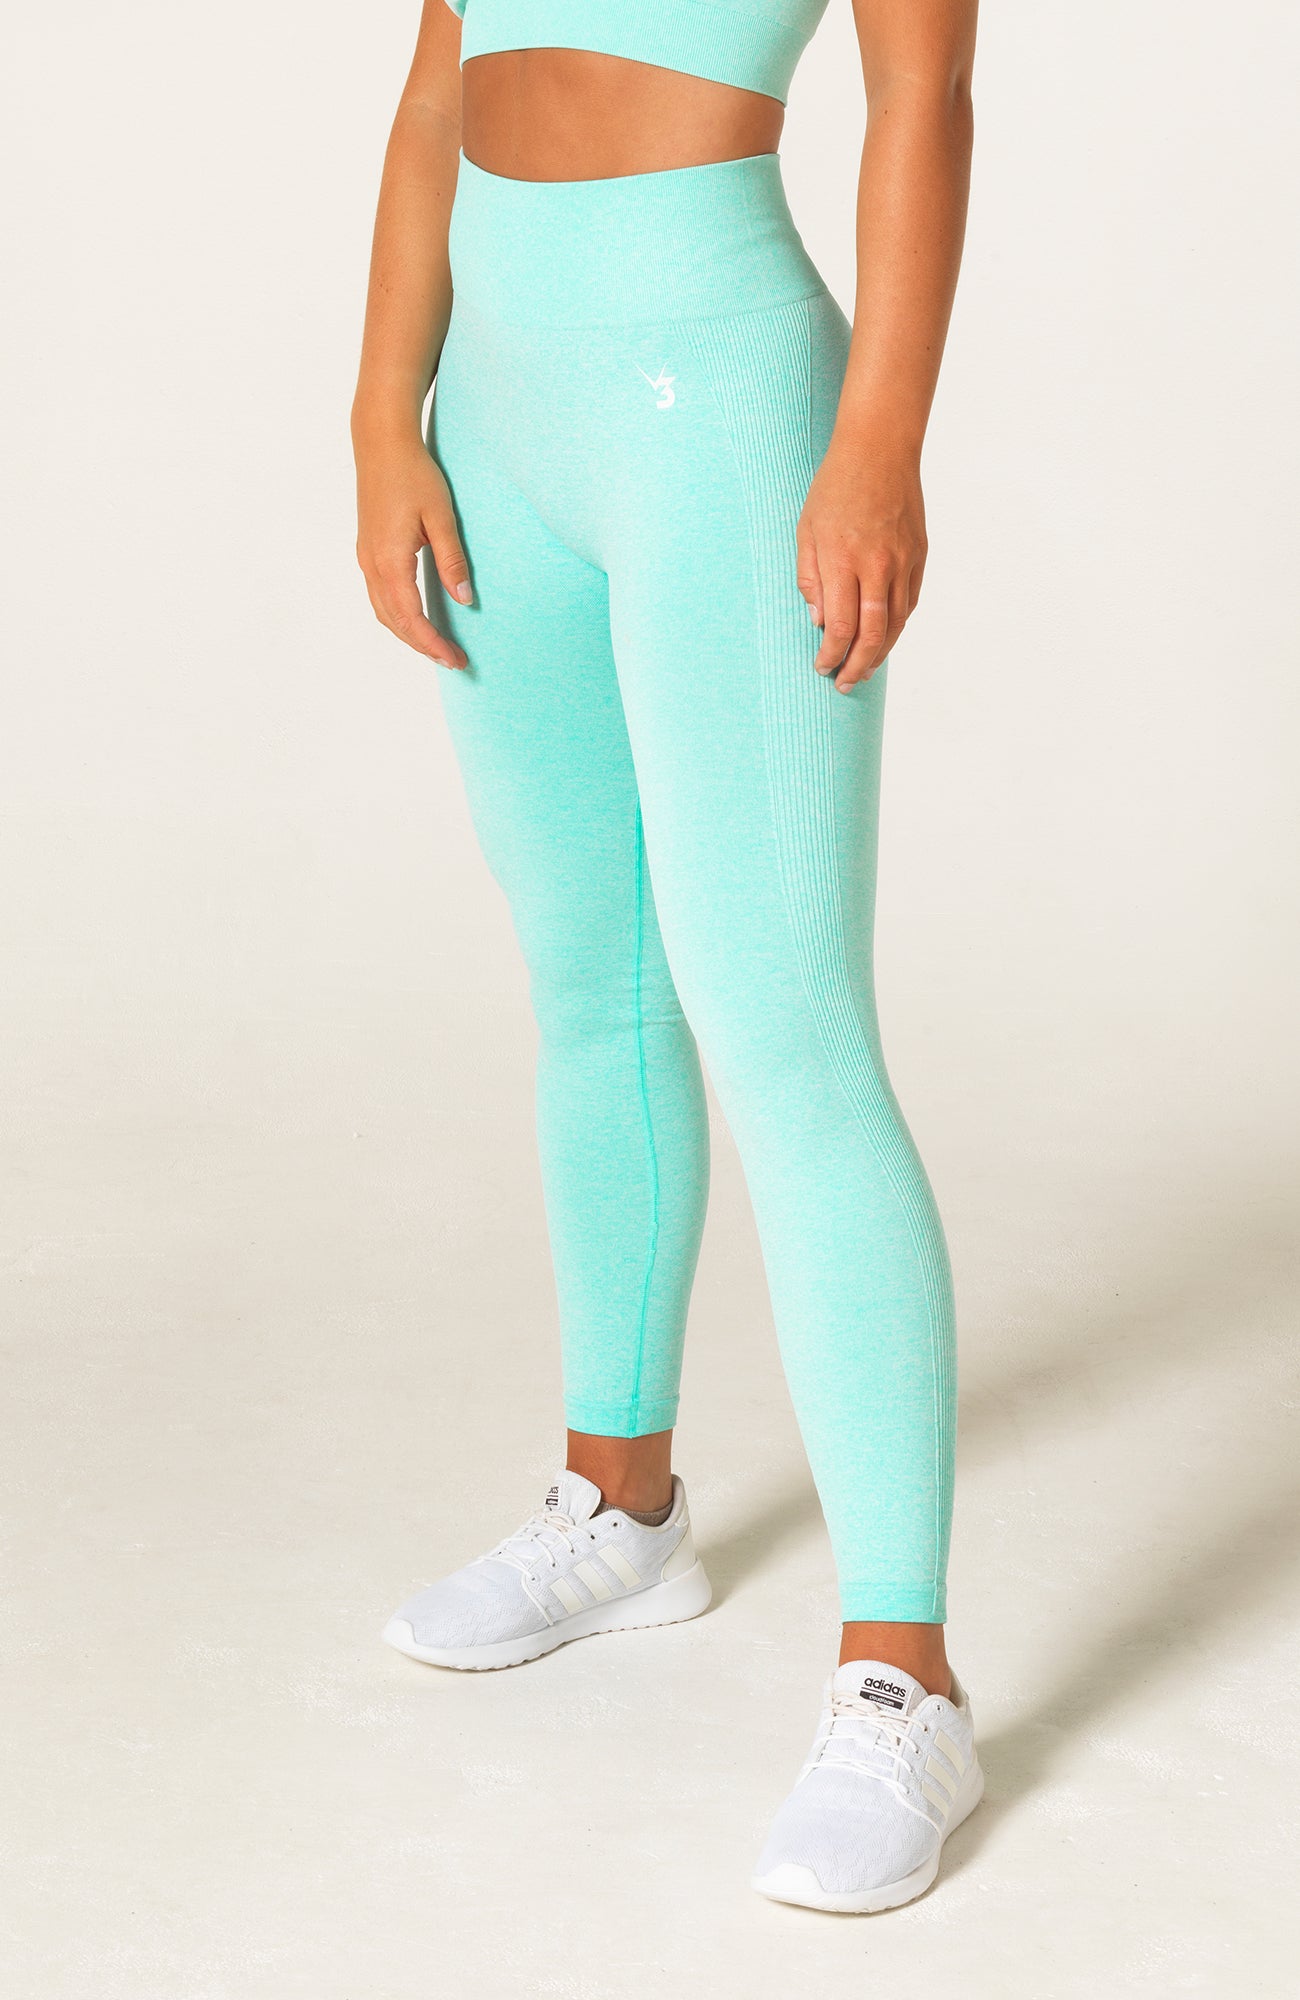 V3 Apparel Women's Define seamless scrunch bum shaping high waisted leggings in mint green – Squat proof sports tights for Gym workouts training, Running, yoga, bodybuilding and bikini fitness.